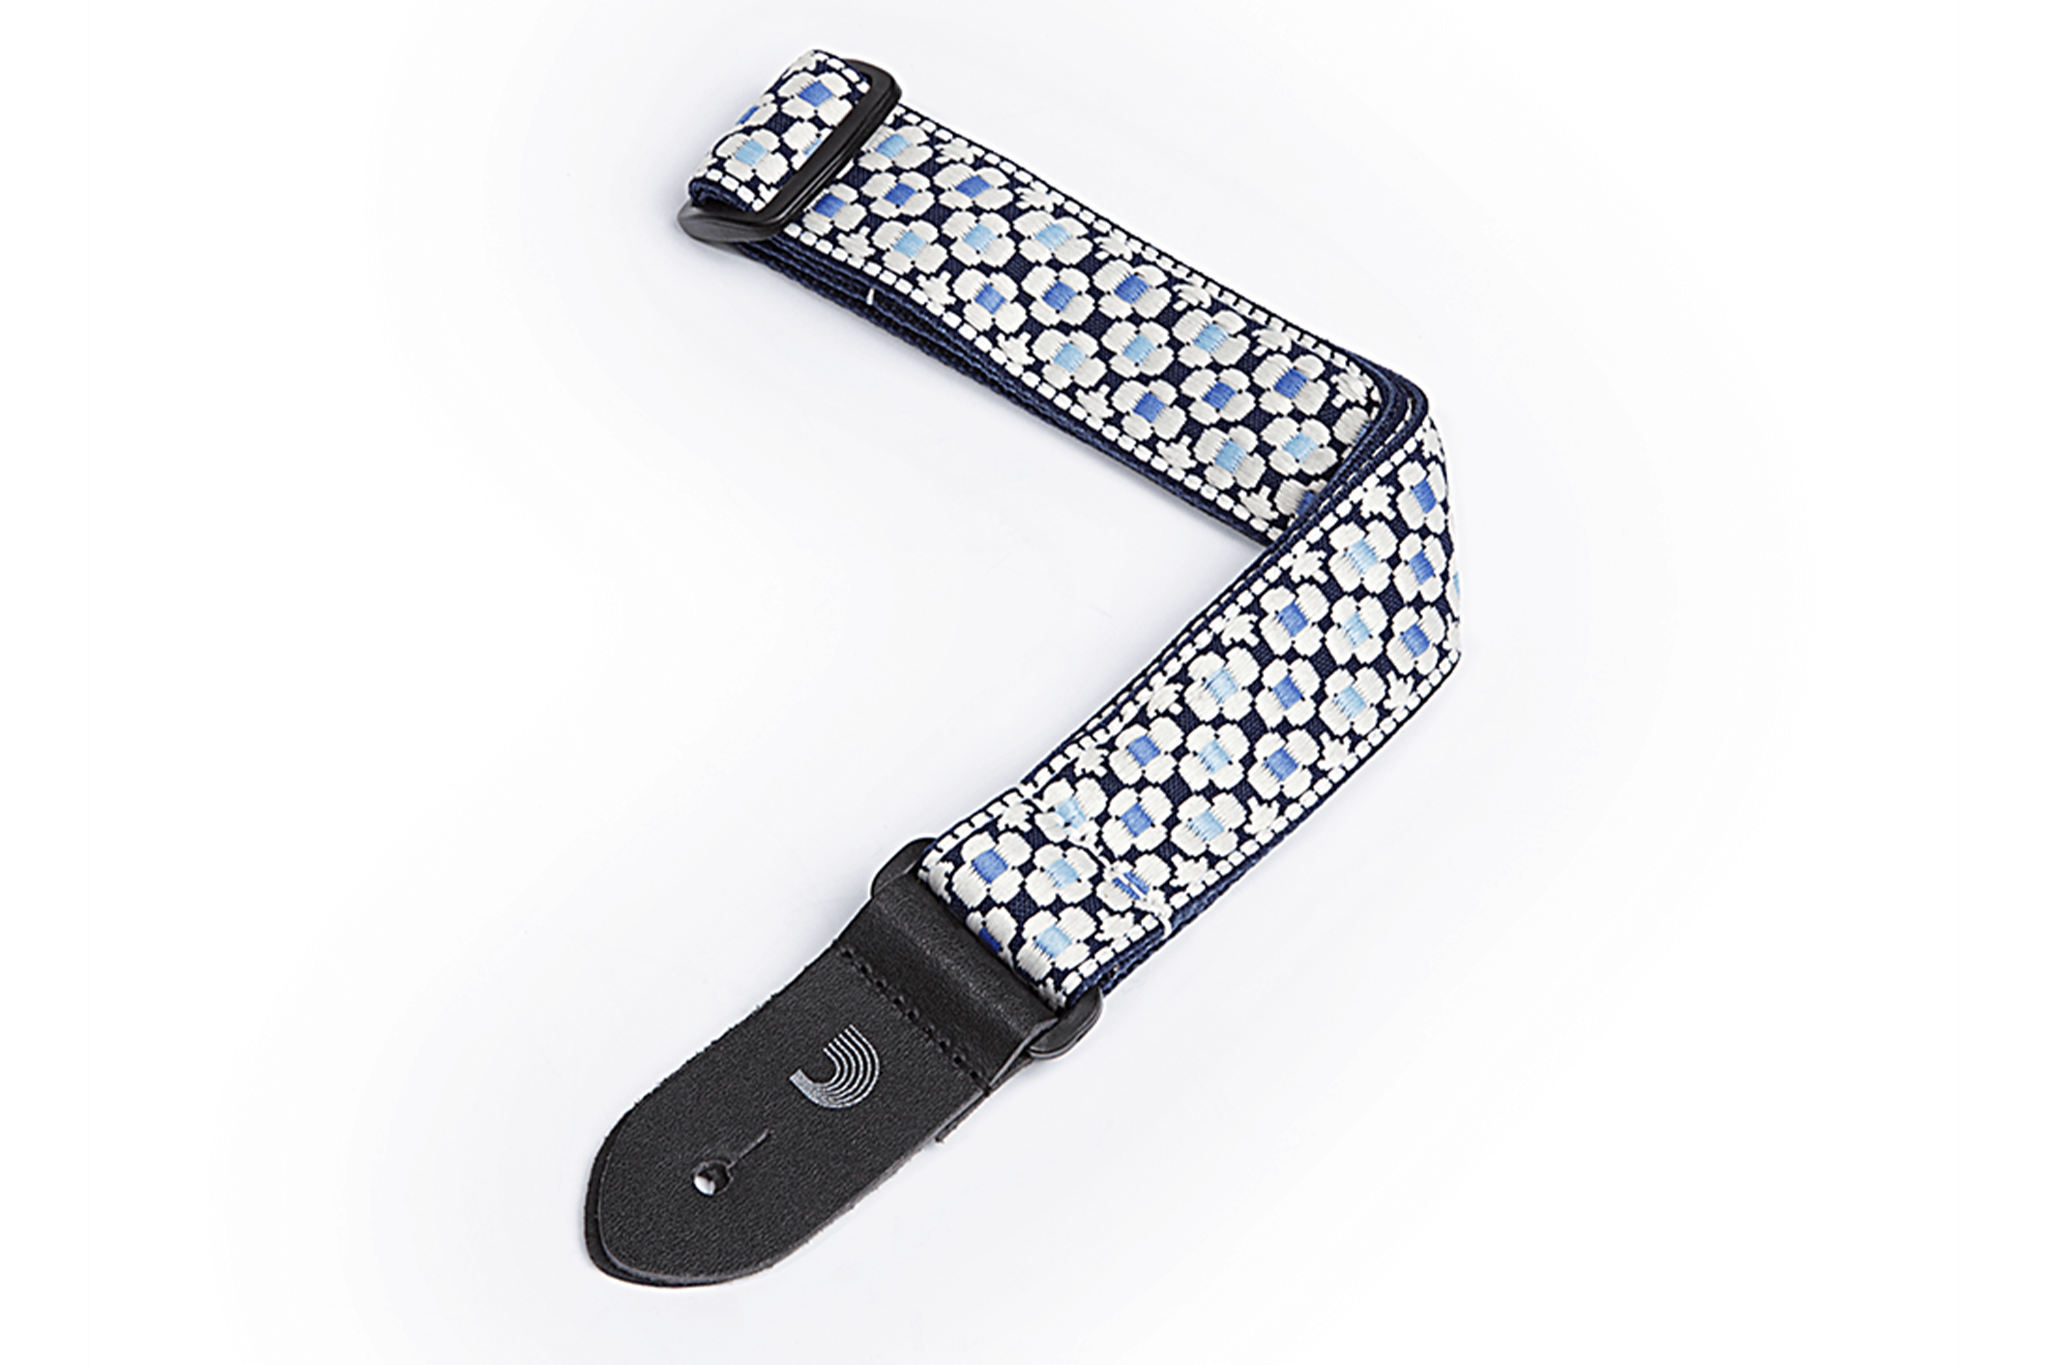 D'Addario Ukulele Strap Woven BLUE and WHITE Flowers 1-1/2 Inch